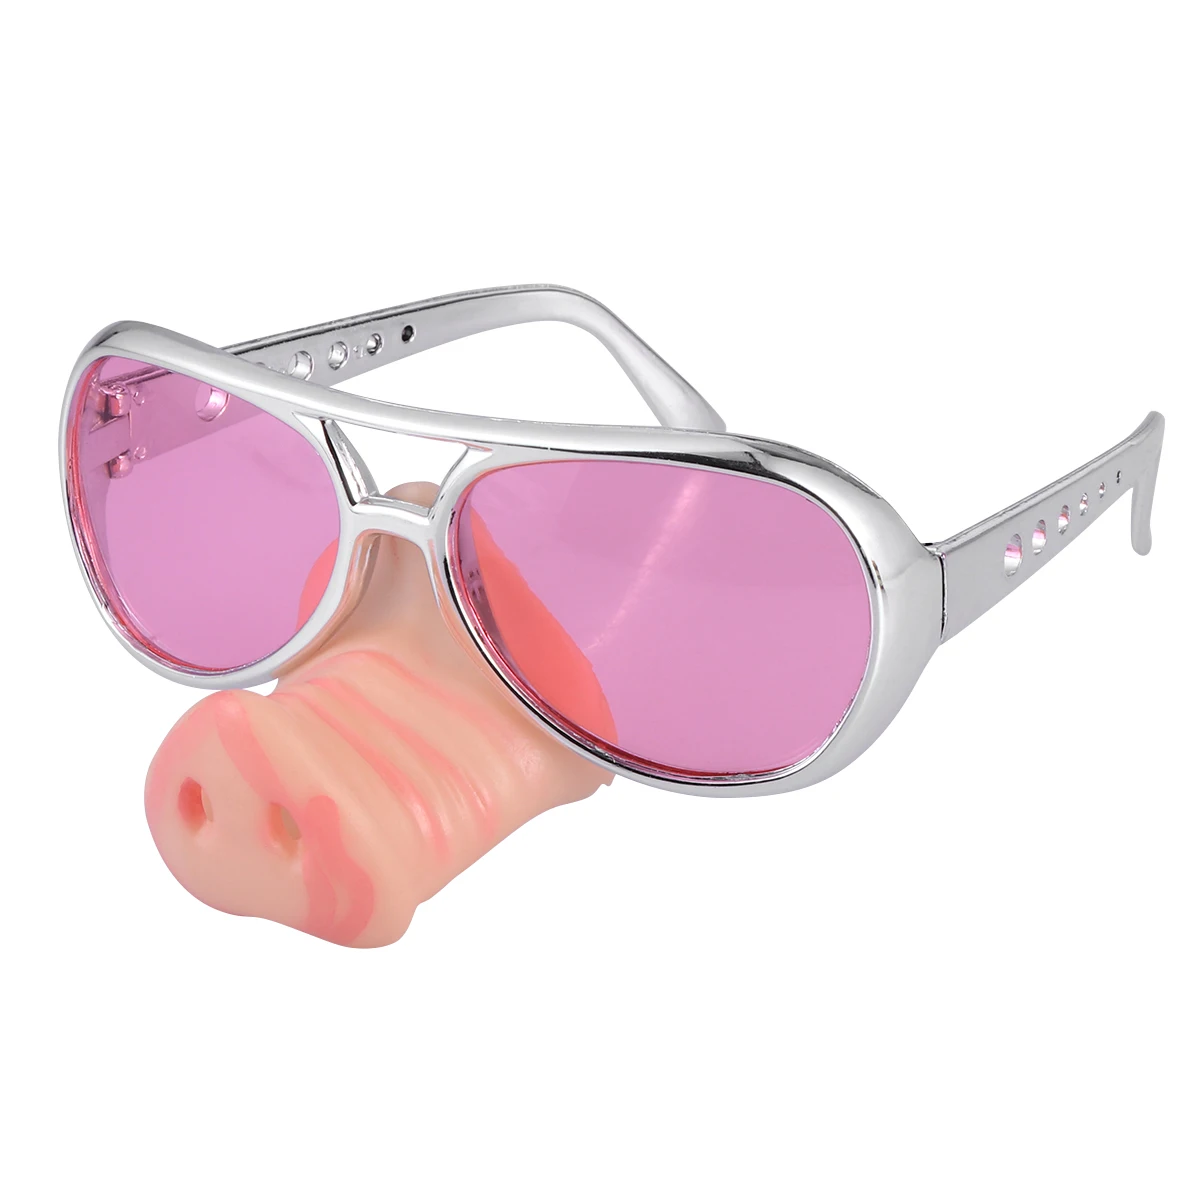 

Funny Halloween Pig Nose Sunglasses Fancy Dress up Piggy Snout Eye-catching Party Favor Glasses Funny Costume Accessories (Pink)